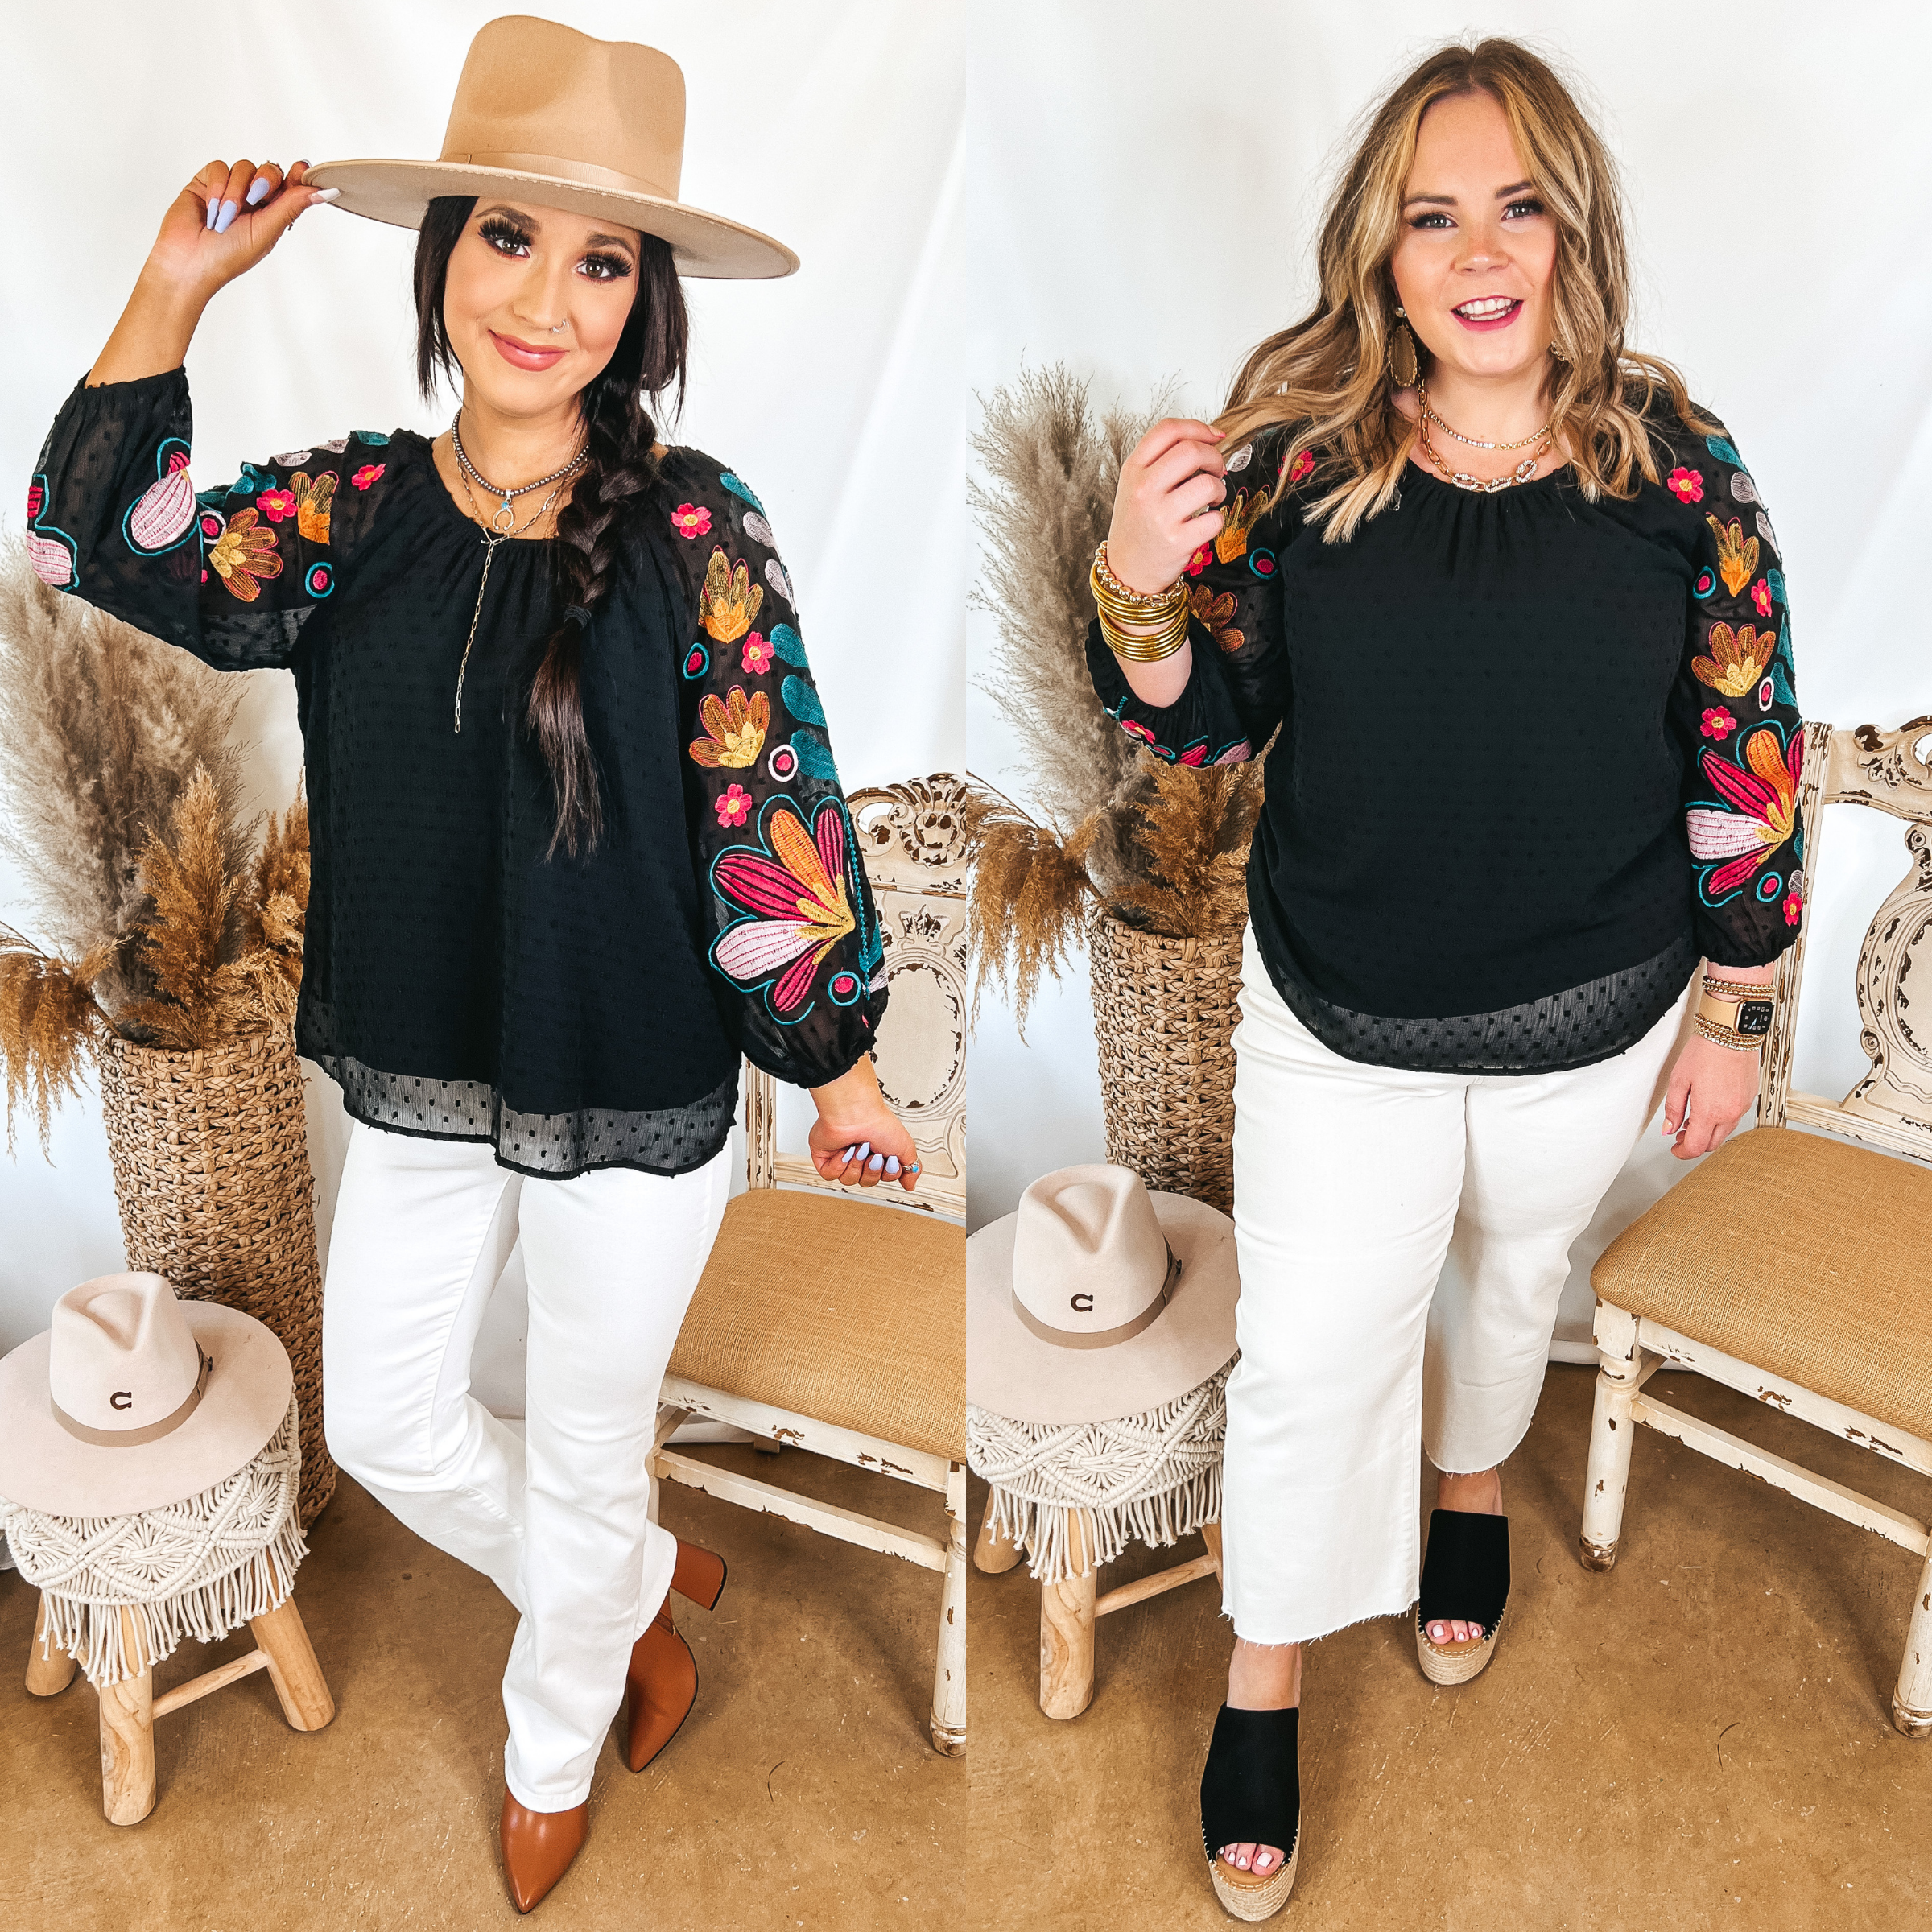 Models are wearing a black swiss dot top that has floral embroidery on the sleeves. Size small model has it paired with white bootcut jeans, tan boots, and a beige hat. Size large model has it paired with white crop jeans, black wedges, and gold jewelry.